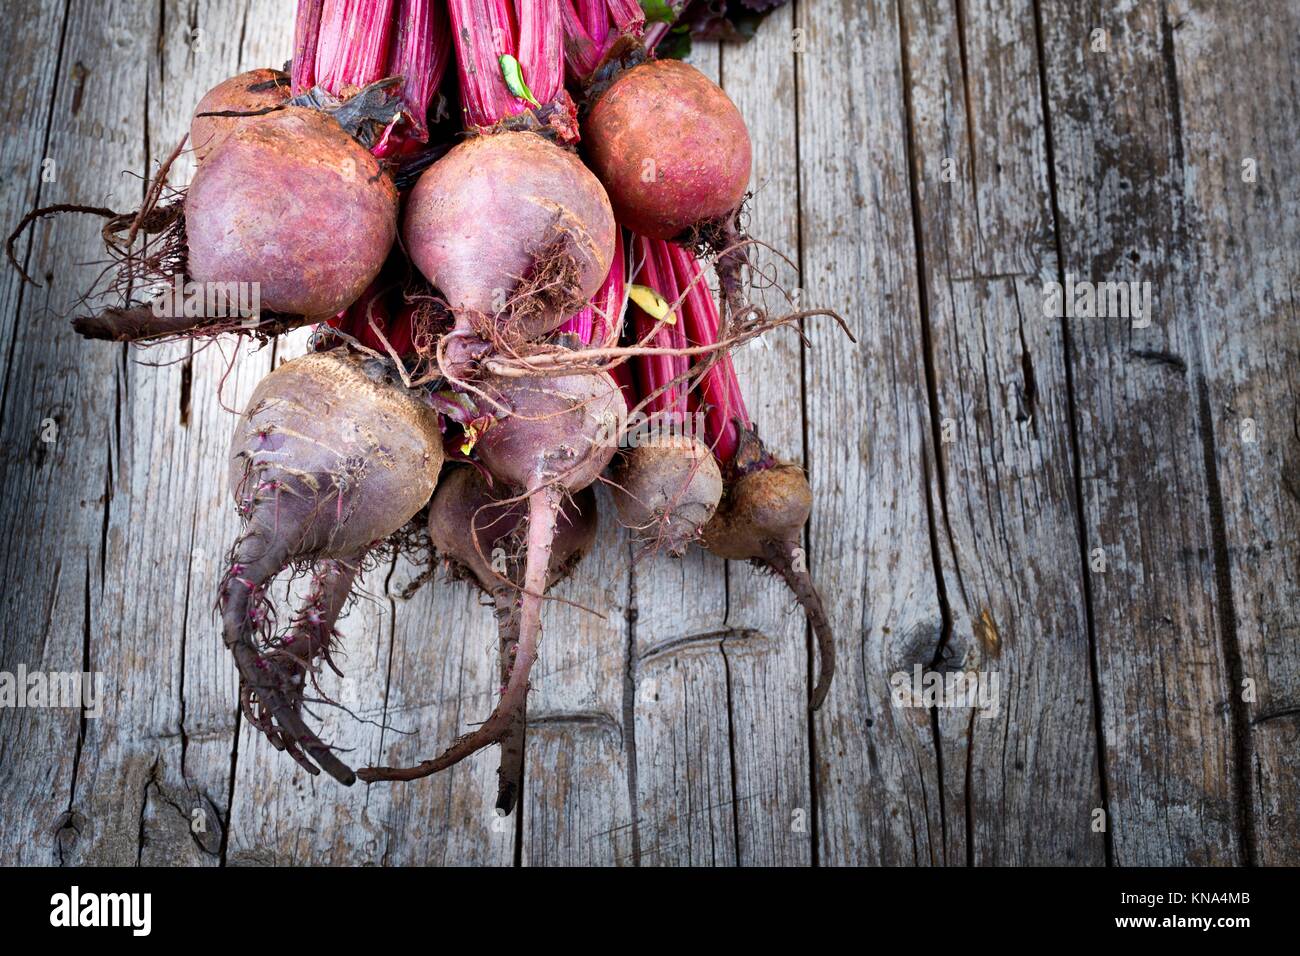 Fresh organic beets just picked from the garden on an old wooden table. Stock Photo